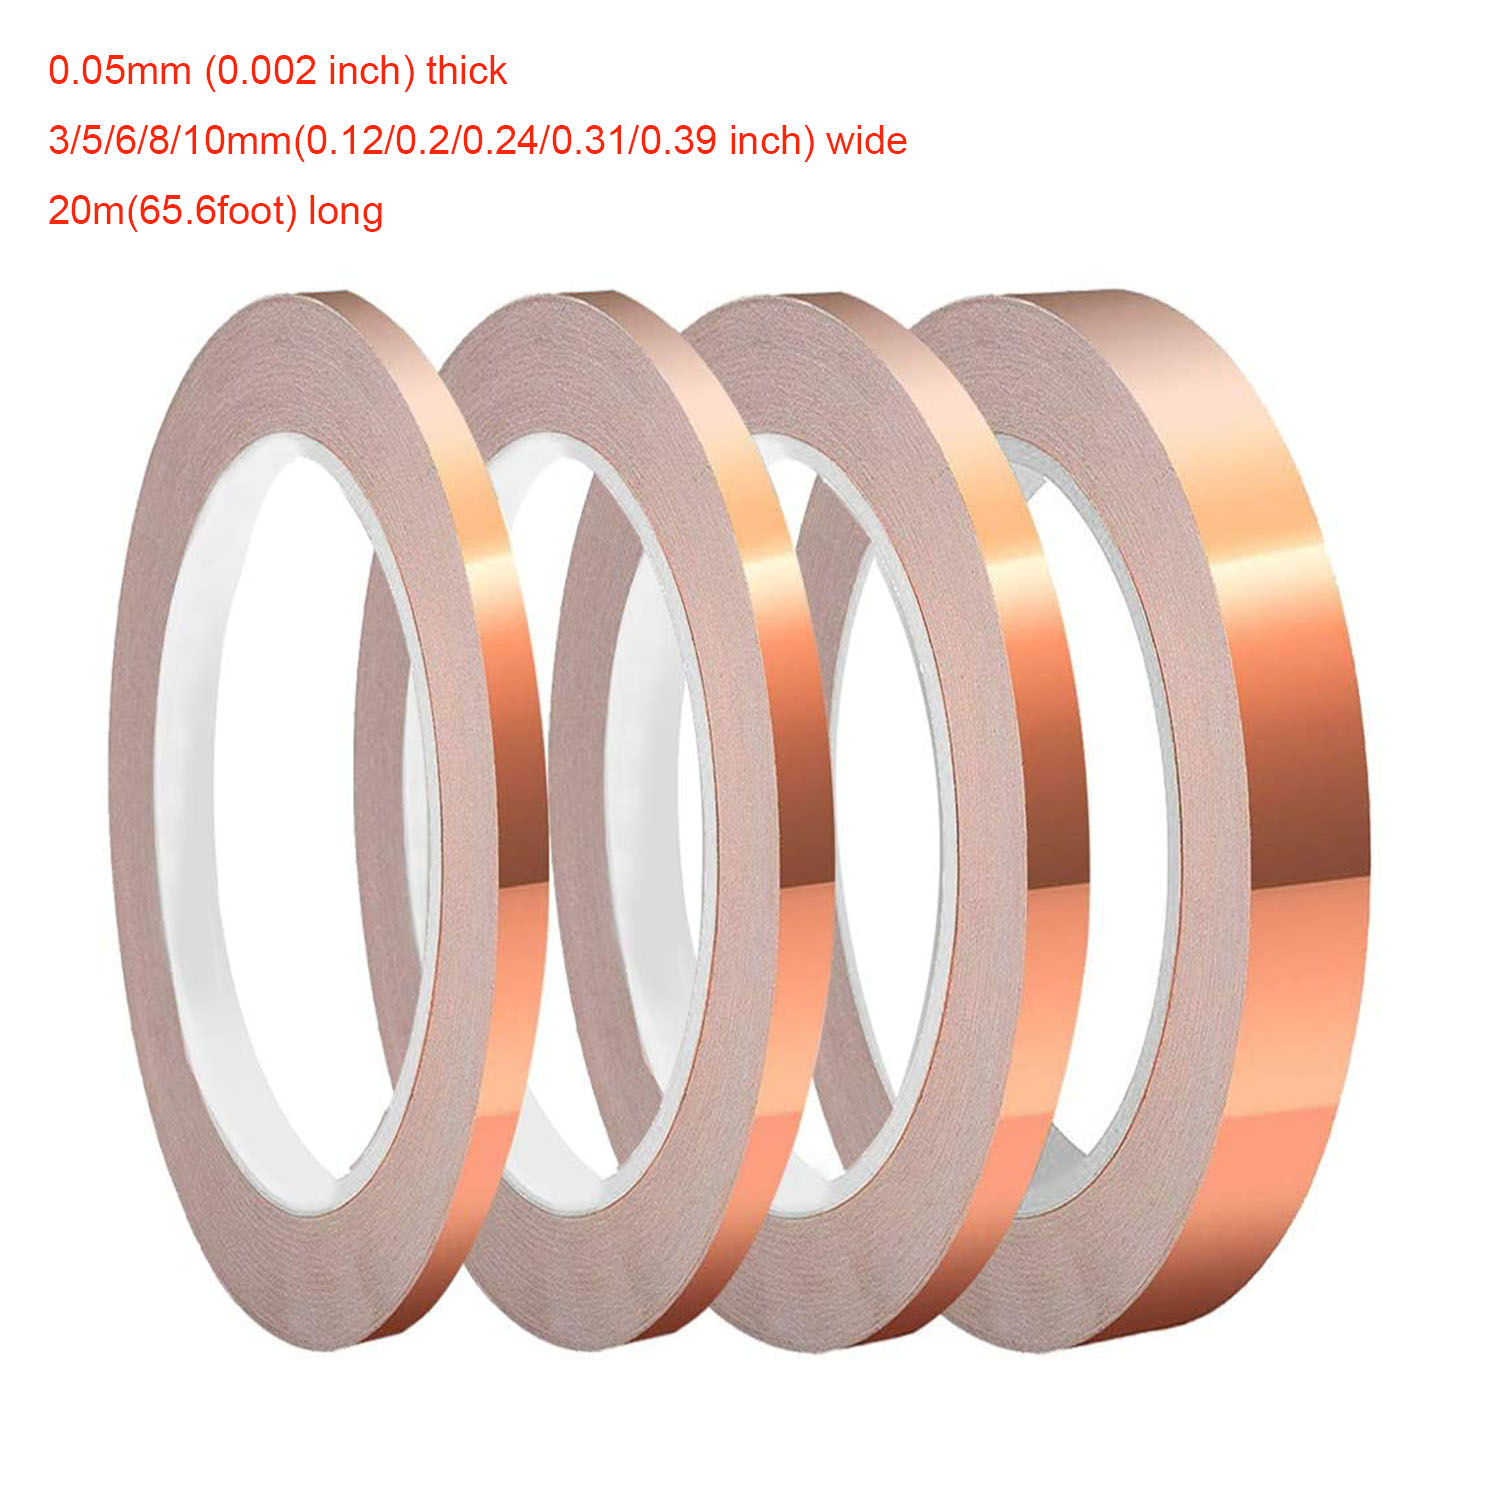 

20m Copper Foil Tape - Heat Resistant, Single Side Conductive, Adhesive Strip For Electrical Soldering, Stained Glass & Grounding Repair